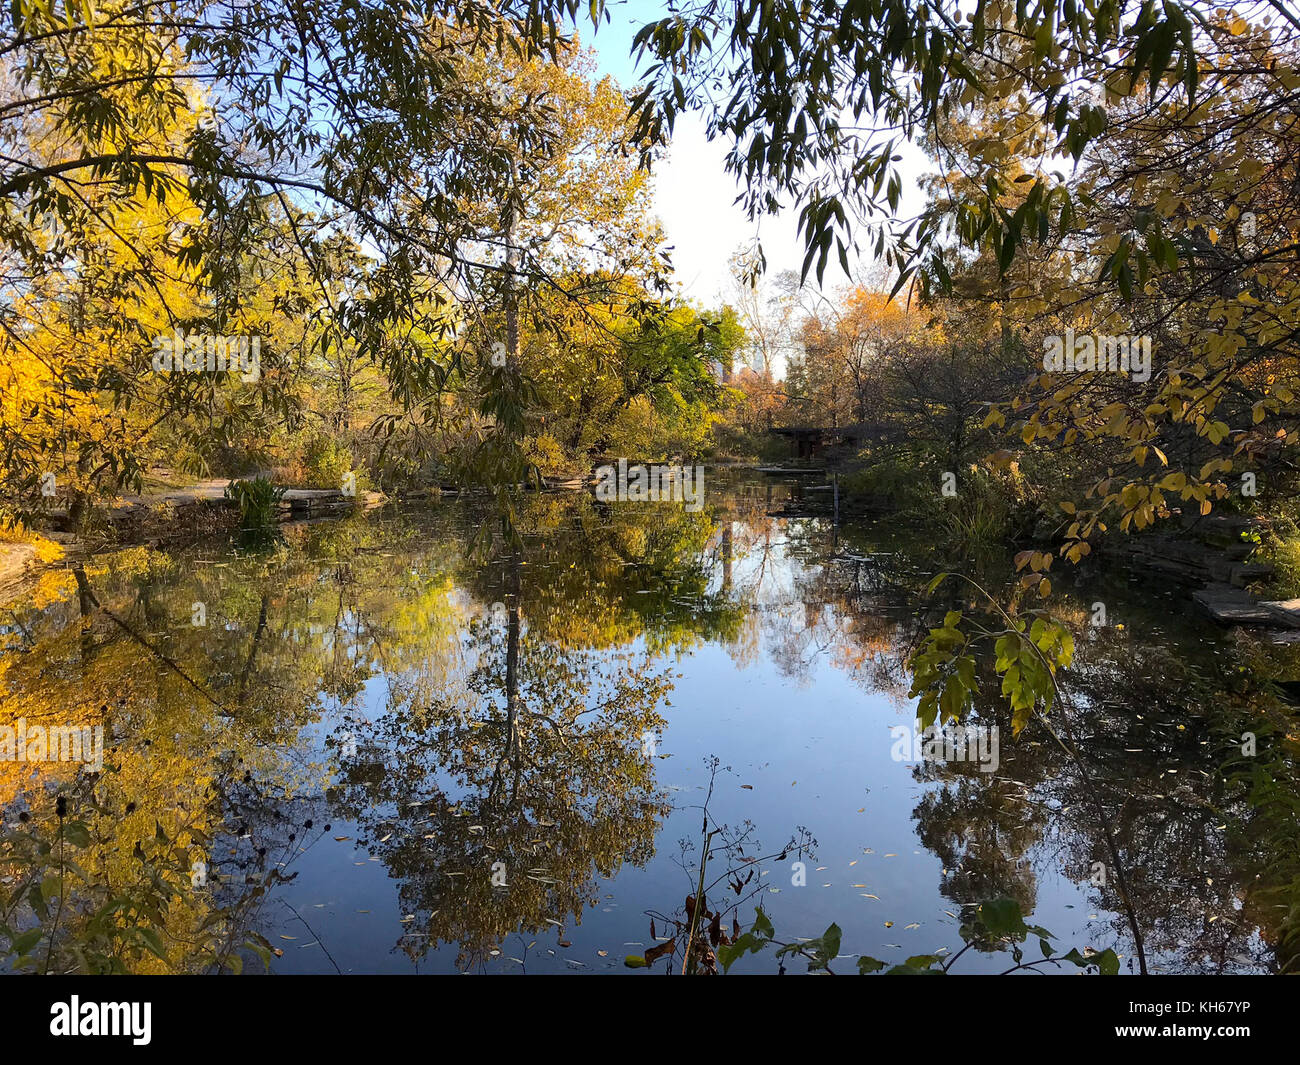 Alfred Caldwell Lily Pool en automne, zoo de Lincoln Park, Lincoln Park, Chicago Banque D'Images